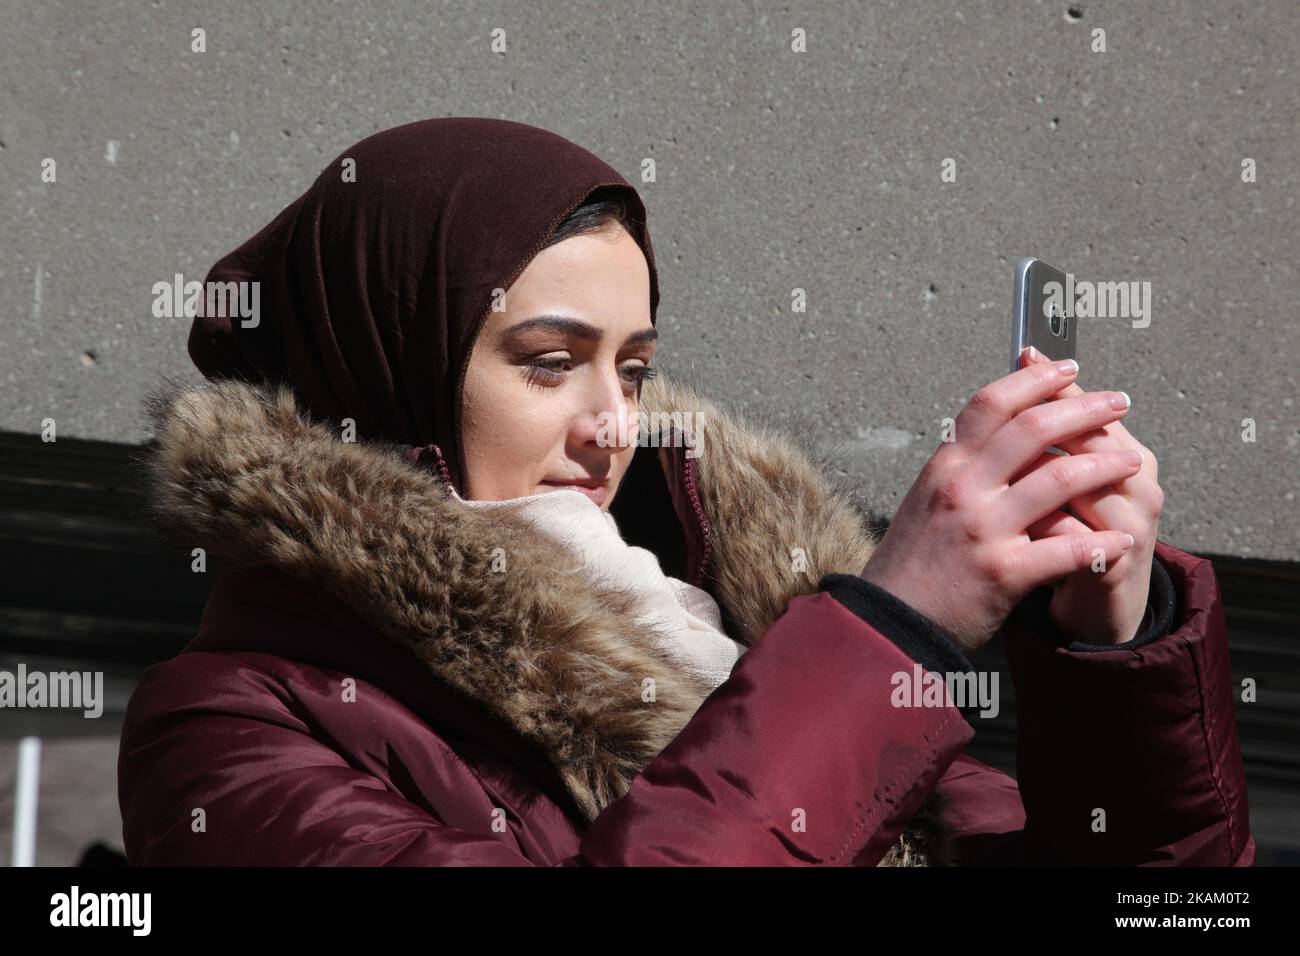 Muslim records a video as anti-Muslim group as protest against Islam, Muslims, Sharia Law and M-103 (private members motion put forth by Liberal MP Iqra Khalid to condemn Islamophobia) in downtown Toronto, Ontario, Canada, on March 04, 2017. Canadians across the country staged similar protests which were met by counter protests by those supporting Muslims and in favour of M-103. M-103 is a private members motion put forth by Liberal MP Iqra Khalid that asks the government to 'recognize the need to quell the increasing public climate of hate and fear' and condemn Islamophobia, as well as all ot Stock Photo